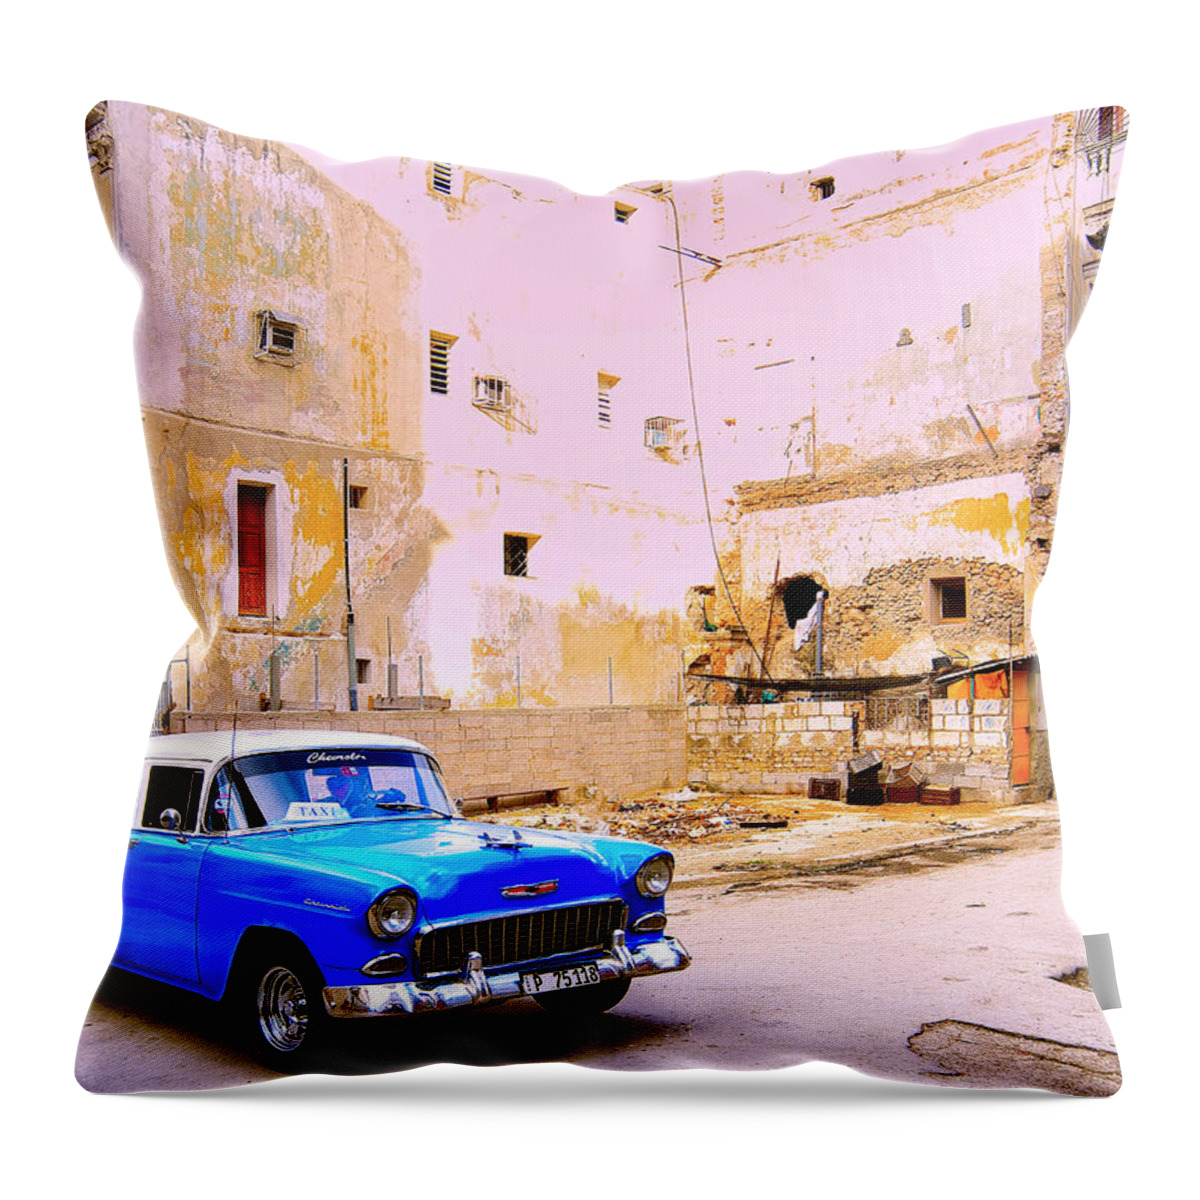 Cuba Throw Pillow featuring the photograph Urban Renewal by Dominic Piperata